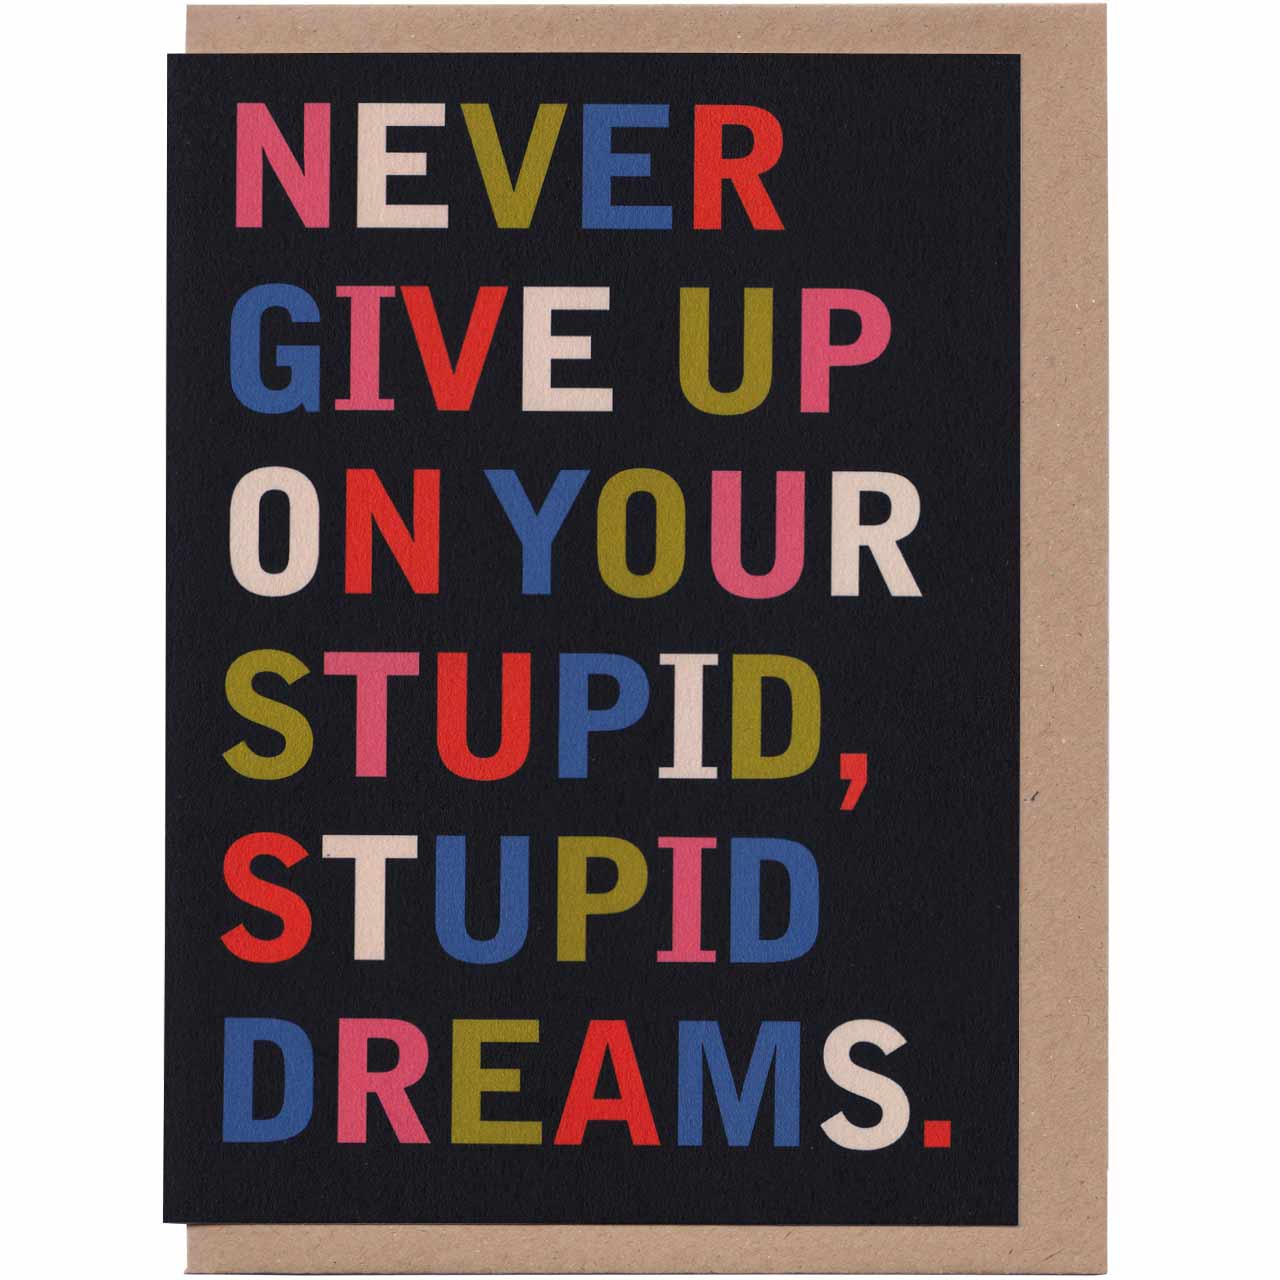 Never Give Up on Your Stupid Dreams Card